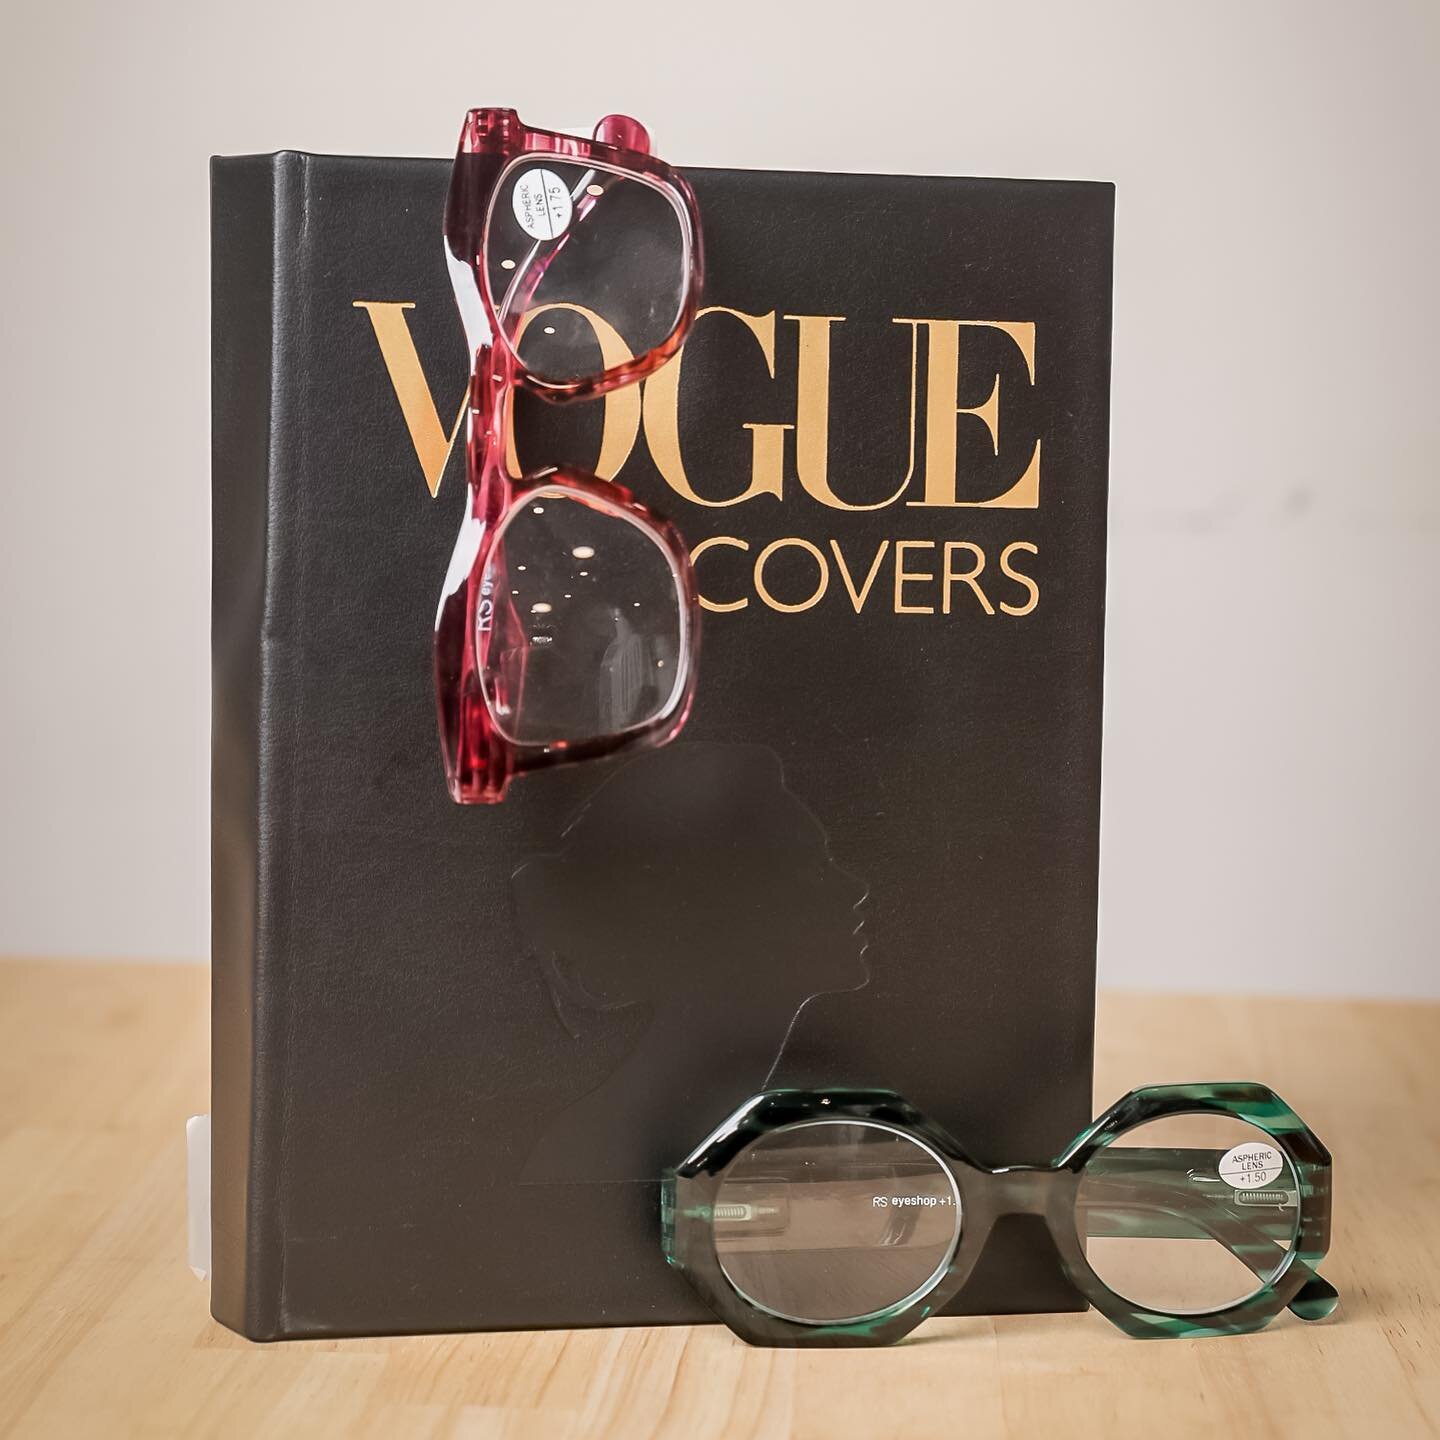 Elevate your look with RS readers!